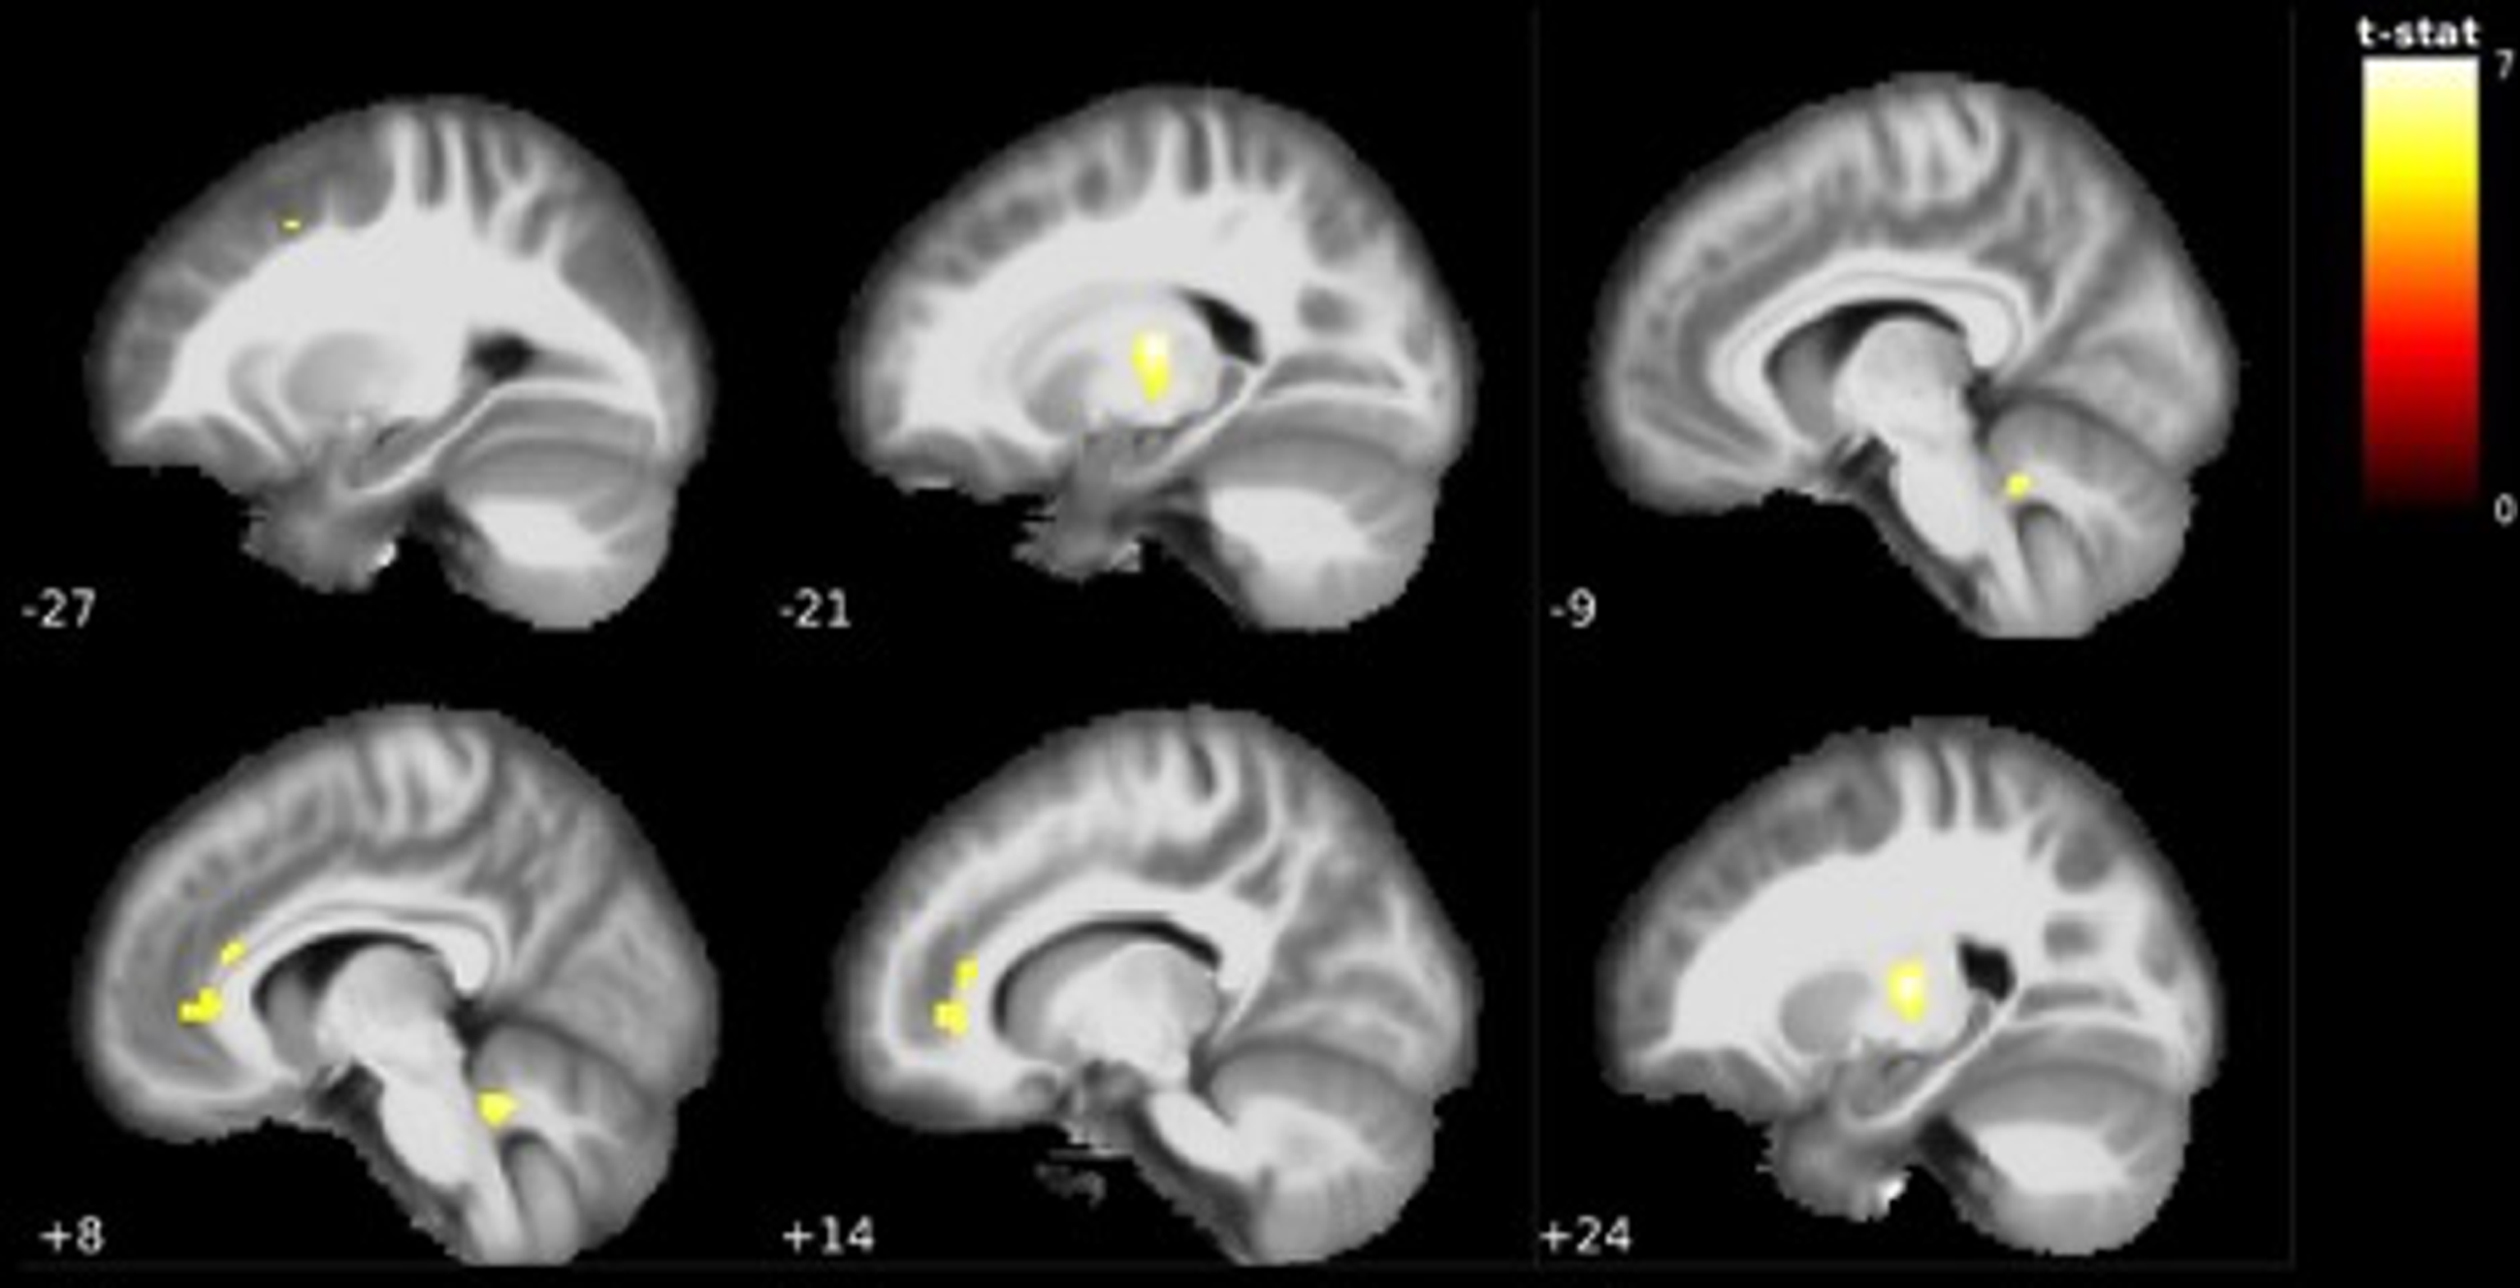 Visualization of grey matter volume reductions in EMCI < CN. Reductions centered around the bilateral ventrolateral thalamus, orbitofrontal cortex, anterior cingulate cortex and cerebellum. MNI coordinate along the x-axis indicated in white. Lighter colors indicate higher t-values (see Table 2).